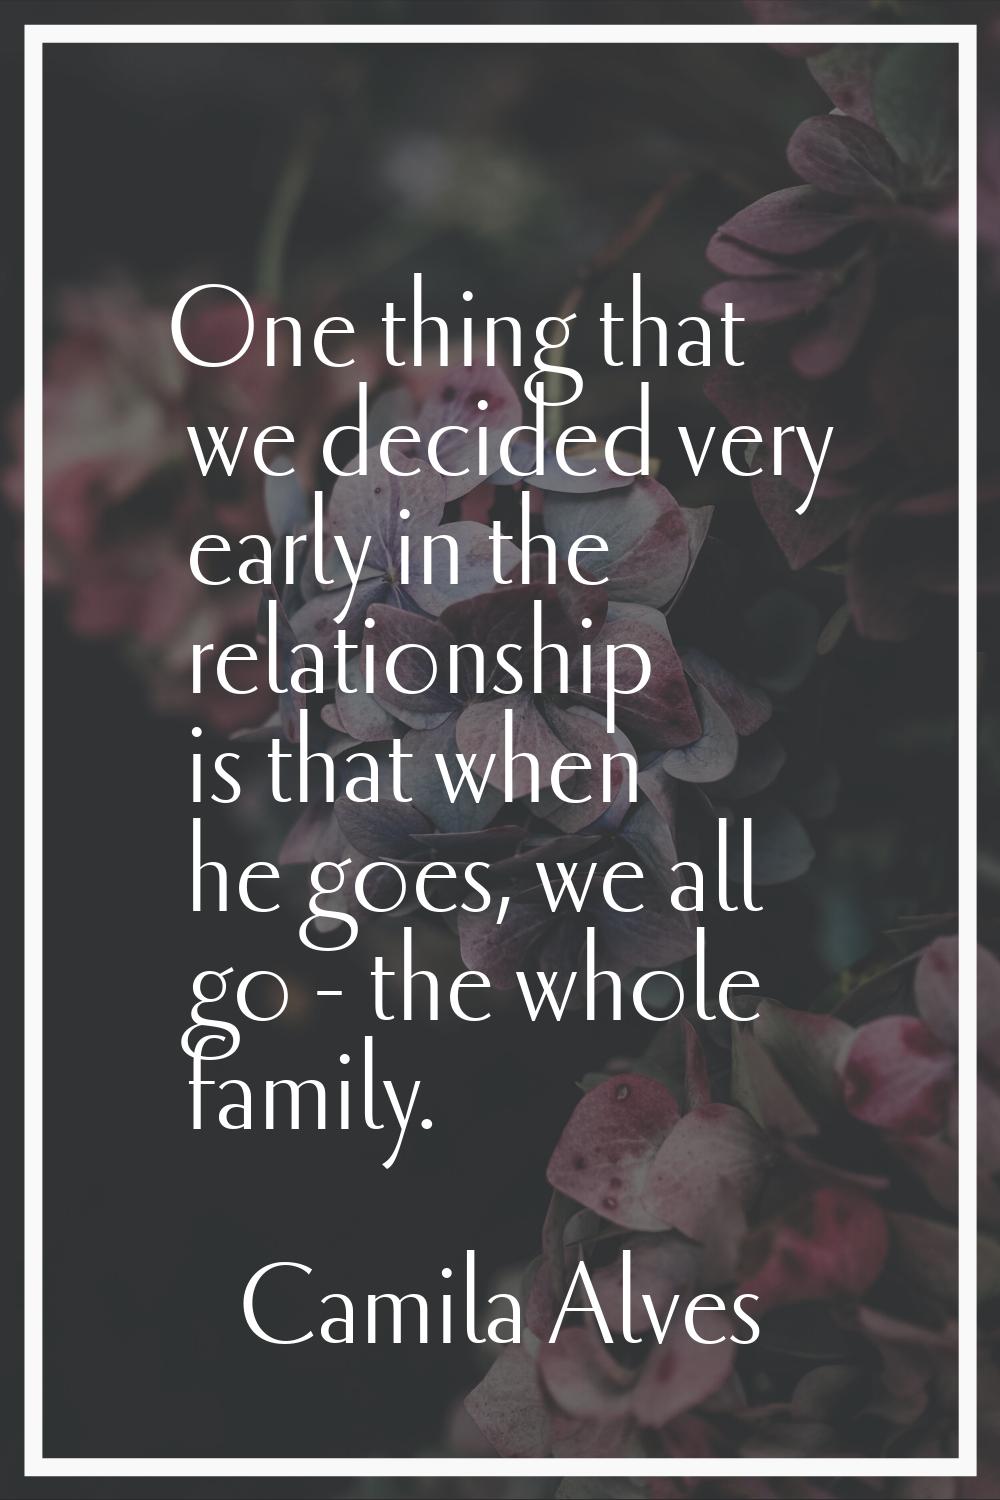 One thing that we decided very early in the relationship is that when he goes, we all go - the whol